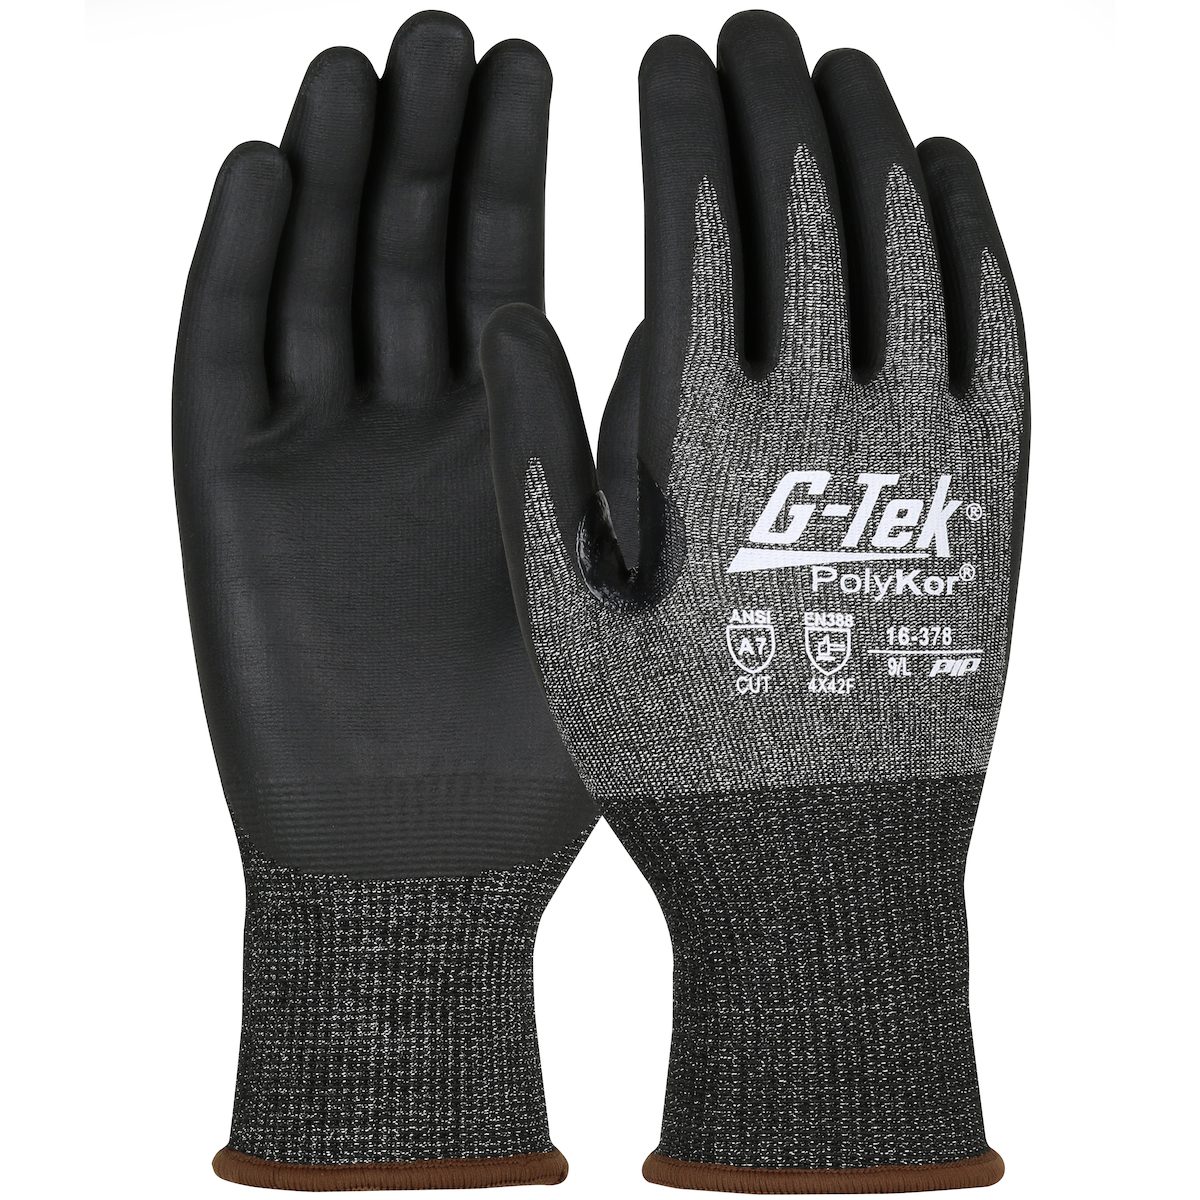 #16-378 PIP® G-Tek®  Seamless Knit PolyKor® X7™ Glove with Nitrile Foam Coated Grip on Palm & Fingers - Touchscreen Compatible 